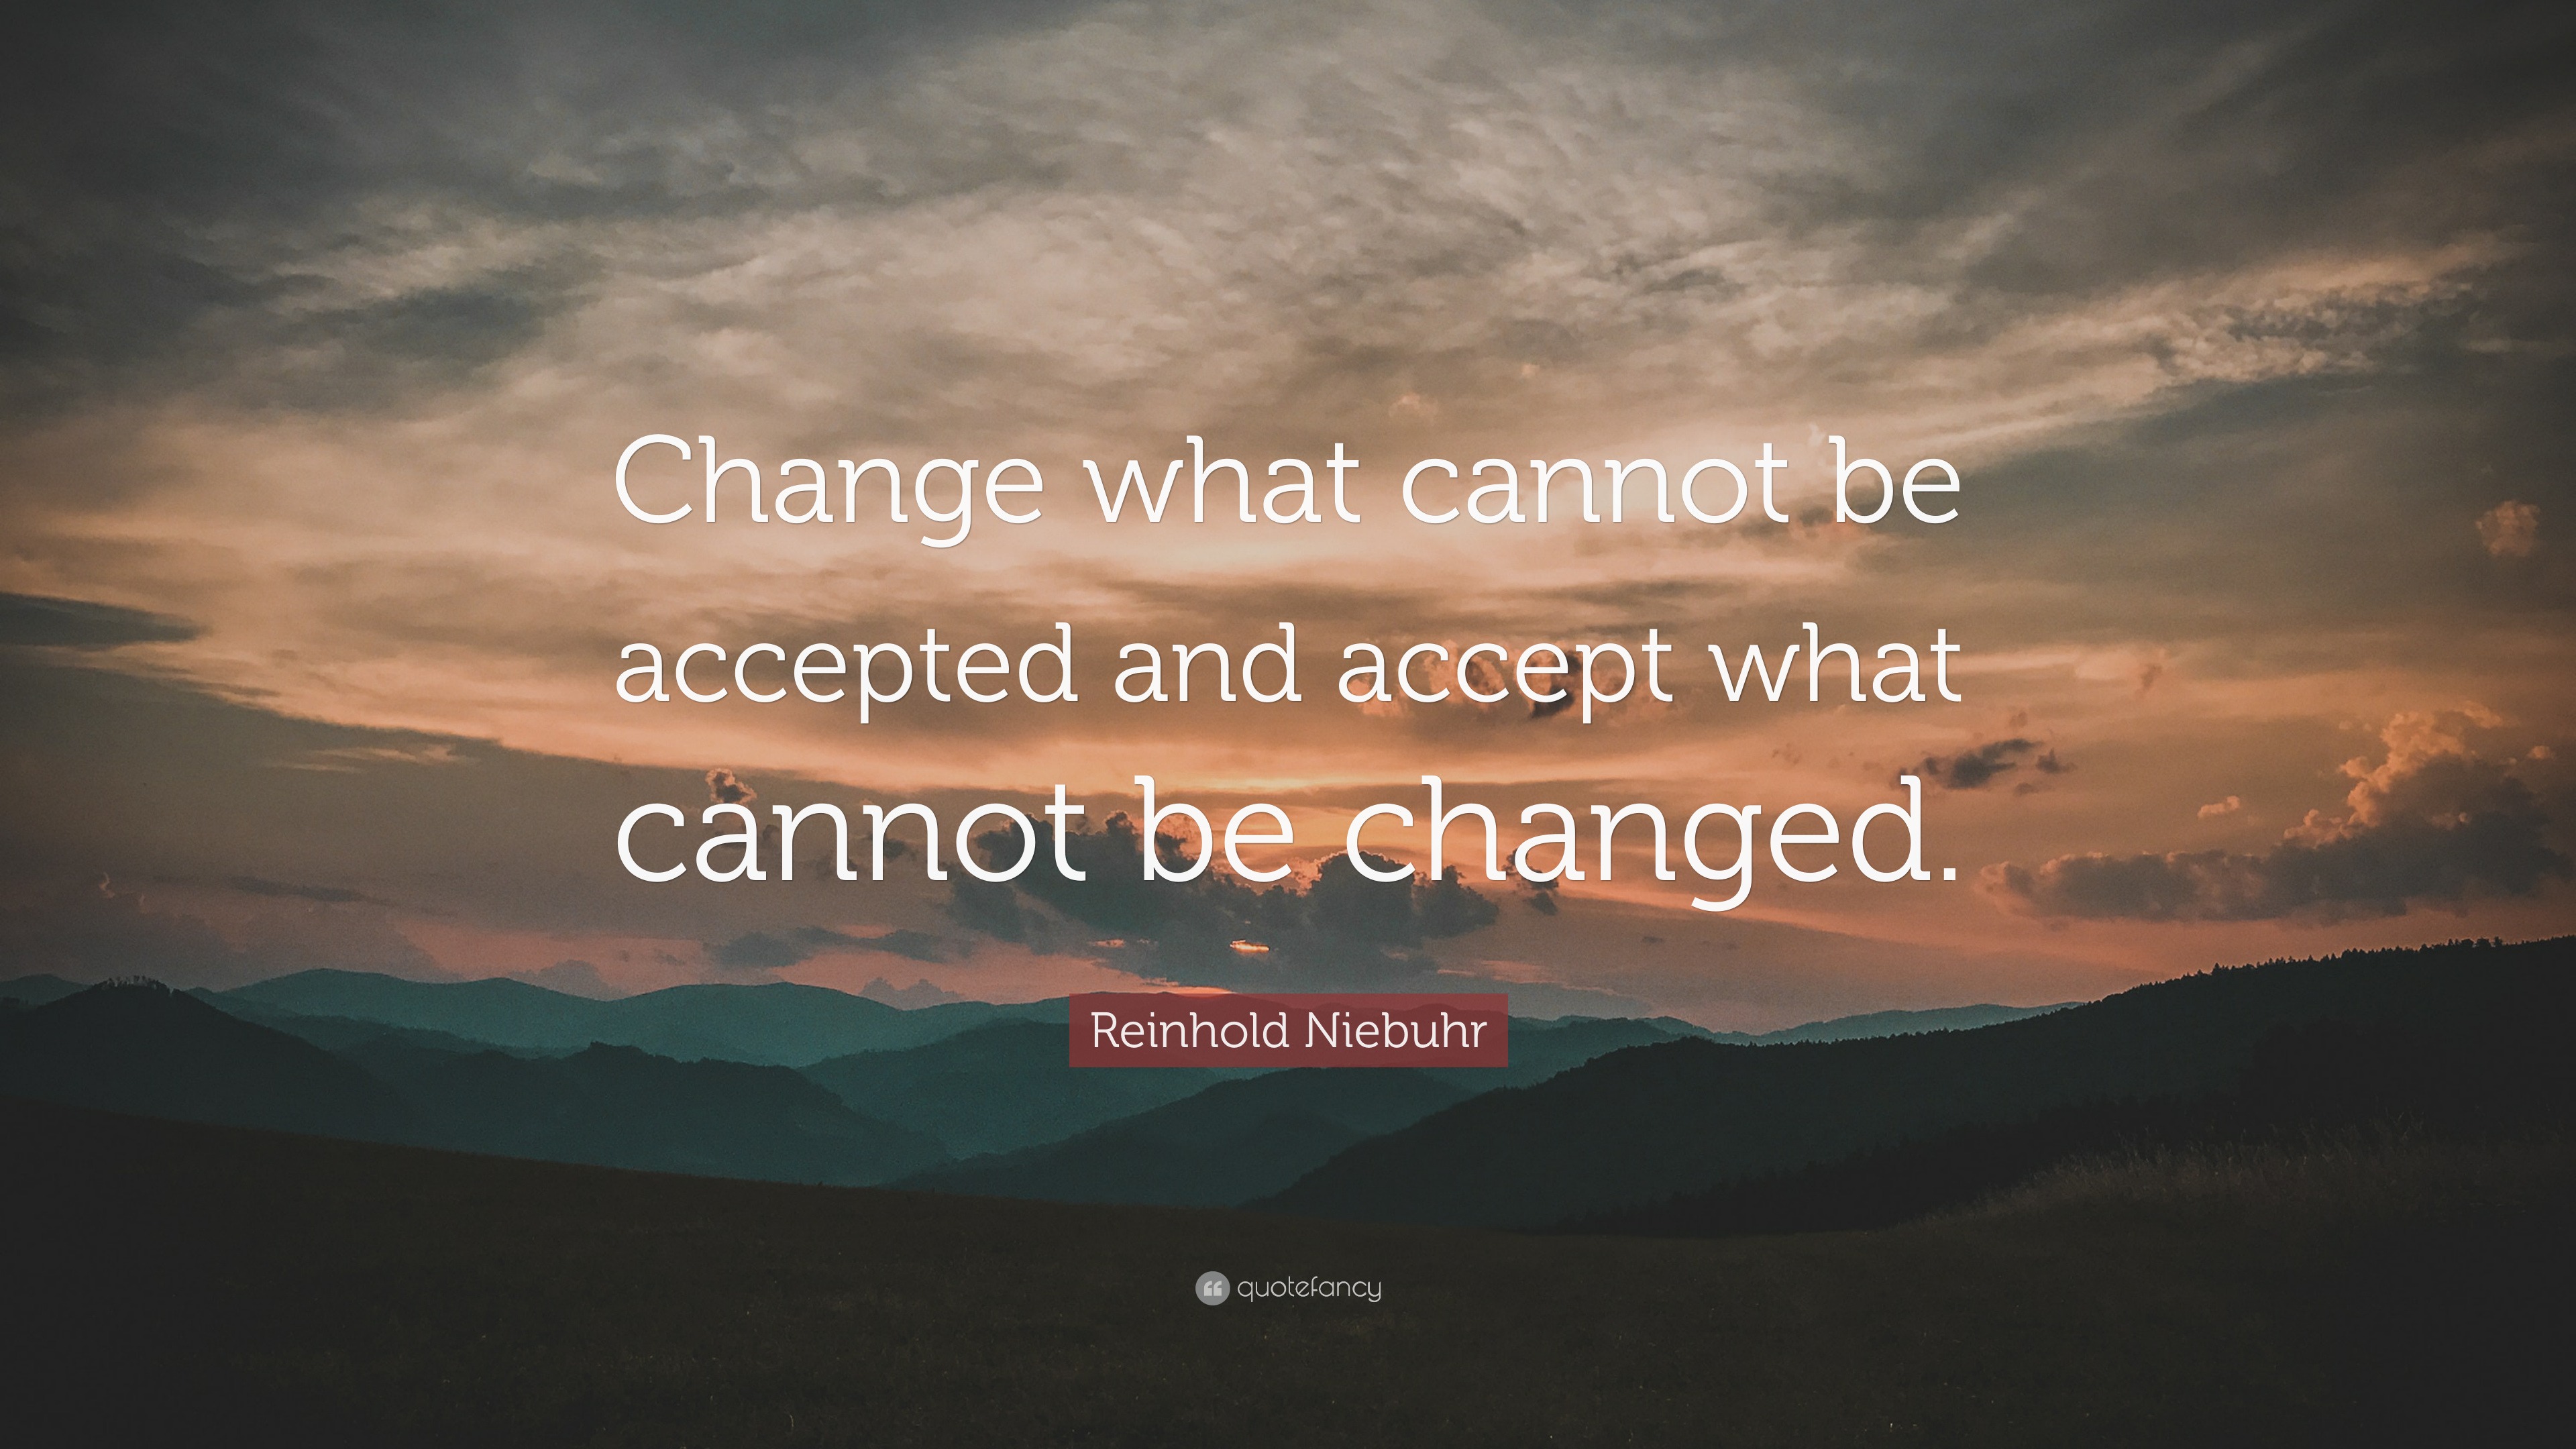 Reinhold Niebuhr Quote: “Change what cannot be accepted and accept what